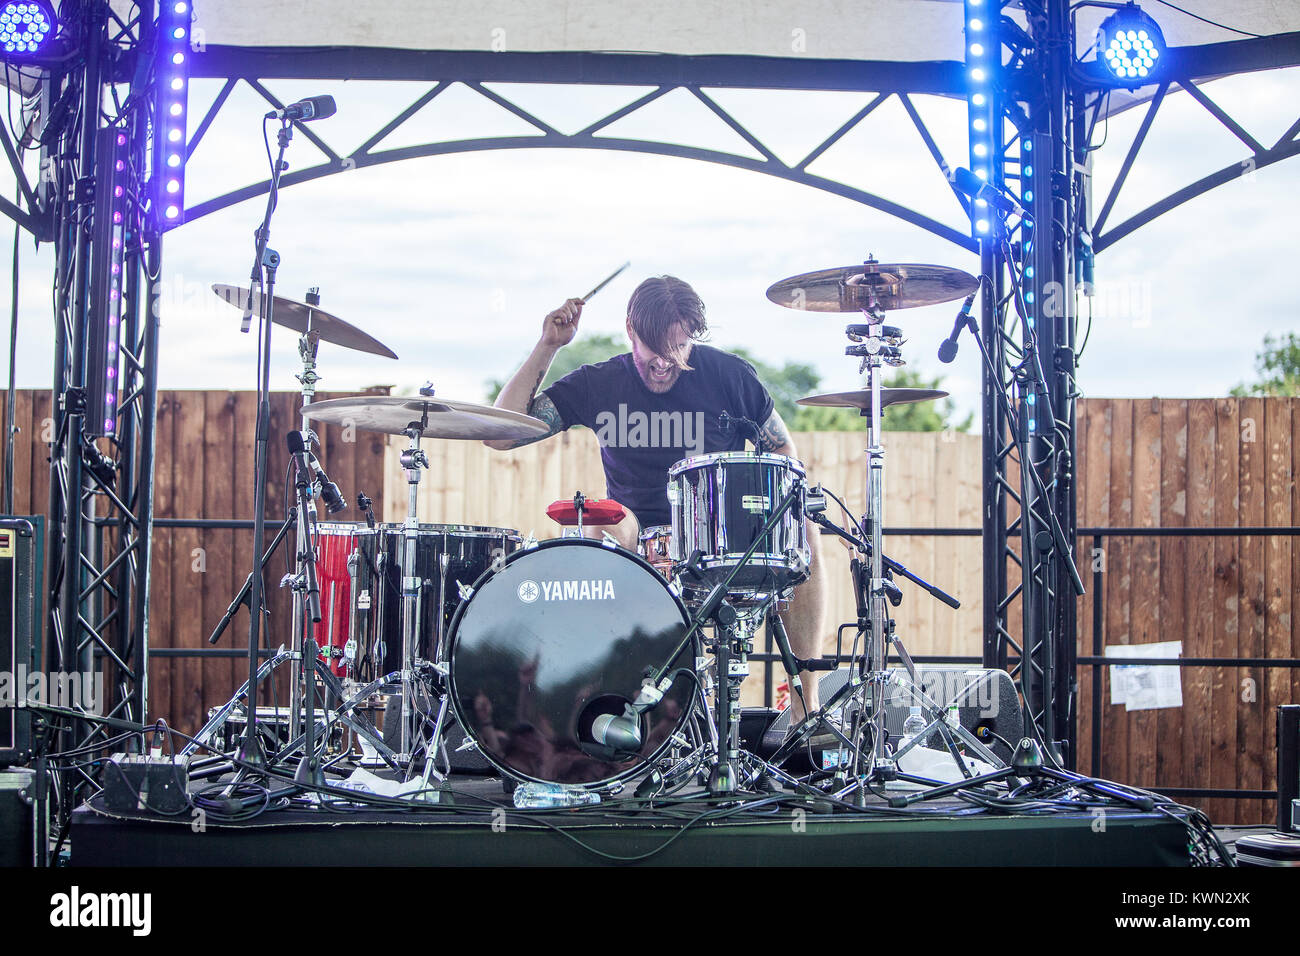 The English hard rock band Turbowolf performs a live concert at the Summer Stage at the Barclaycard British Summer Time festival 2014 at Hyde Park, London. Here drummer Blake Davies is pictured live on stage. UK 04.07.2014. Stock Photo